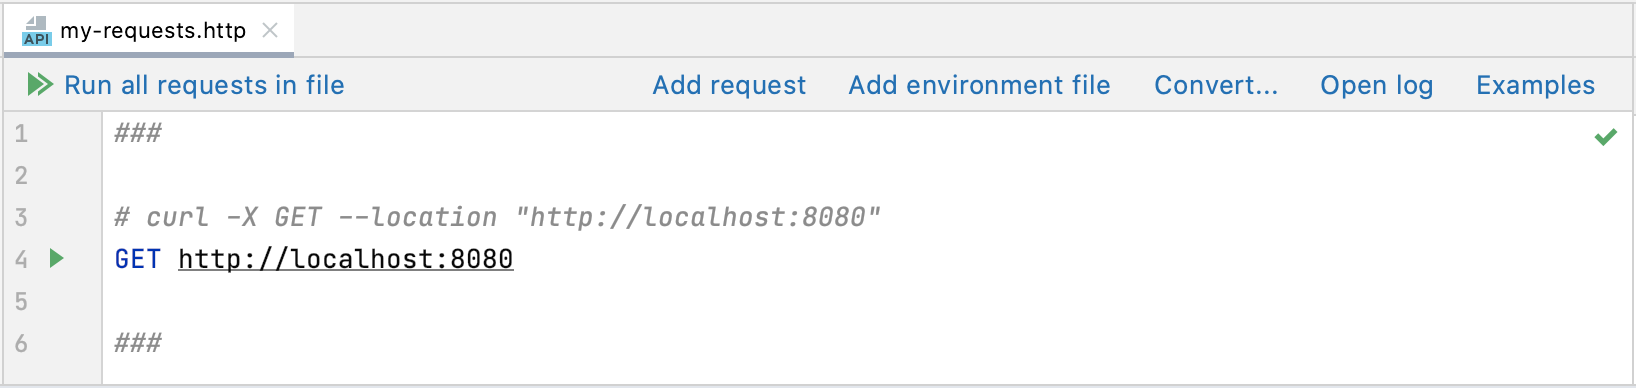 cURL request converted to HTTP request on paste